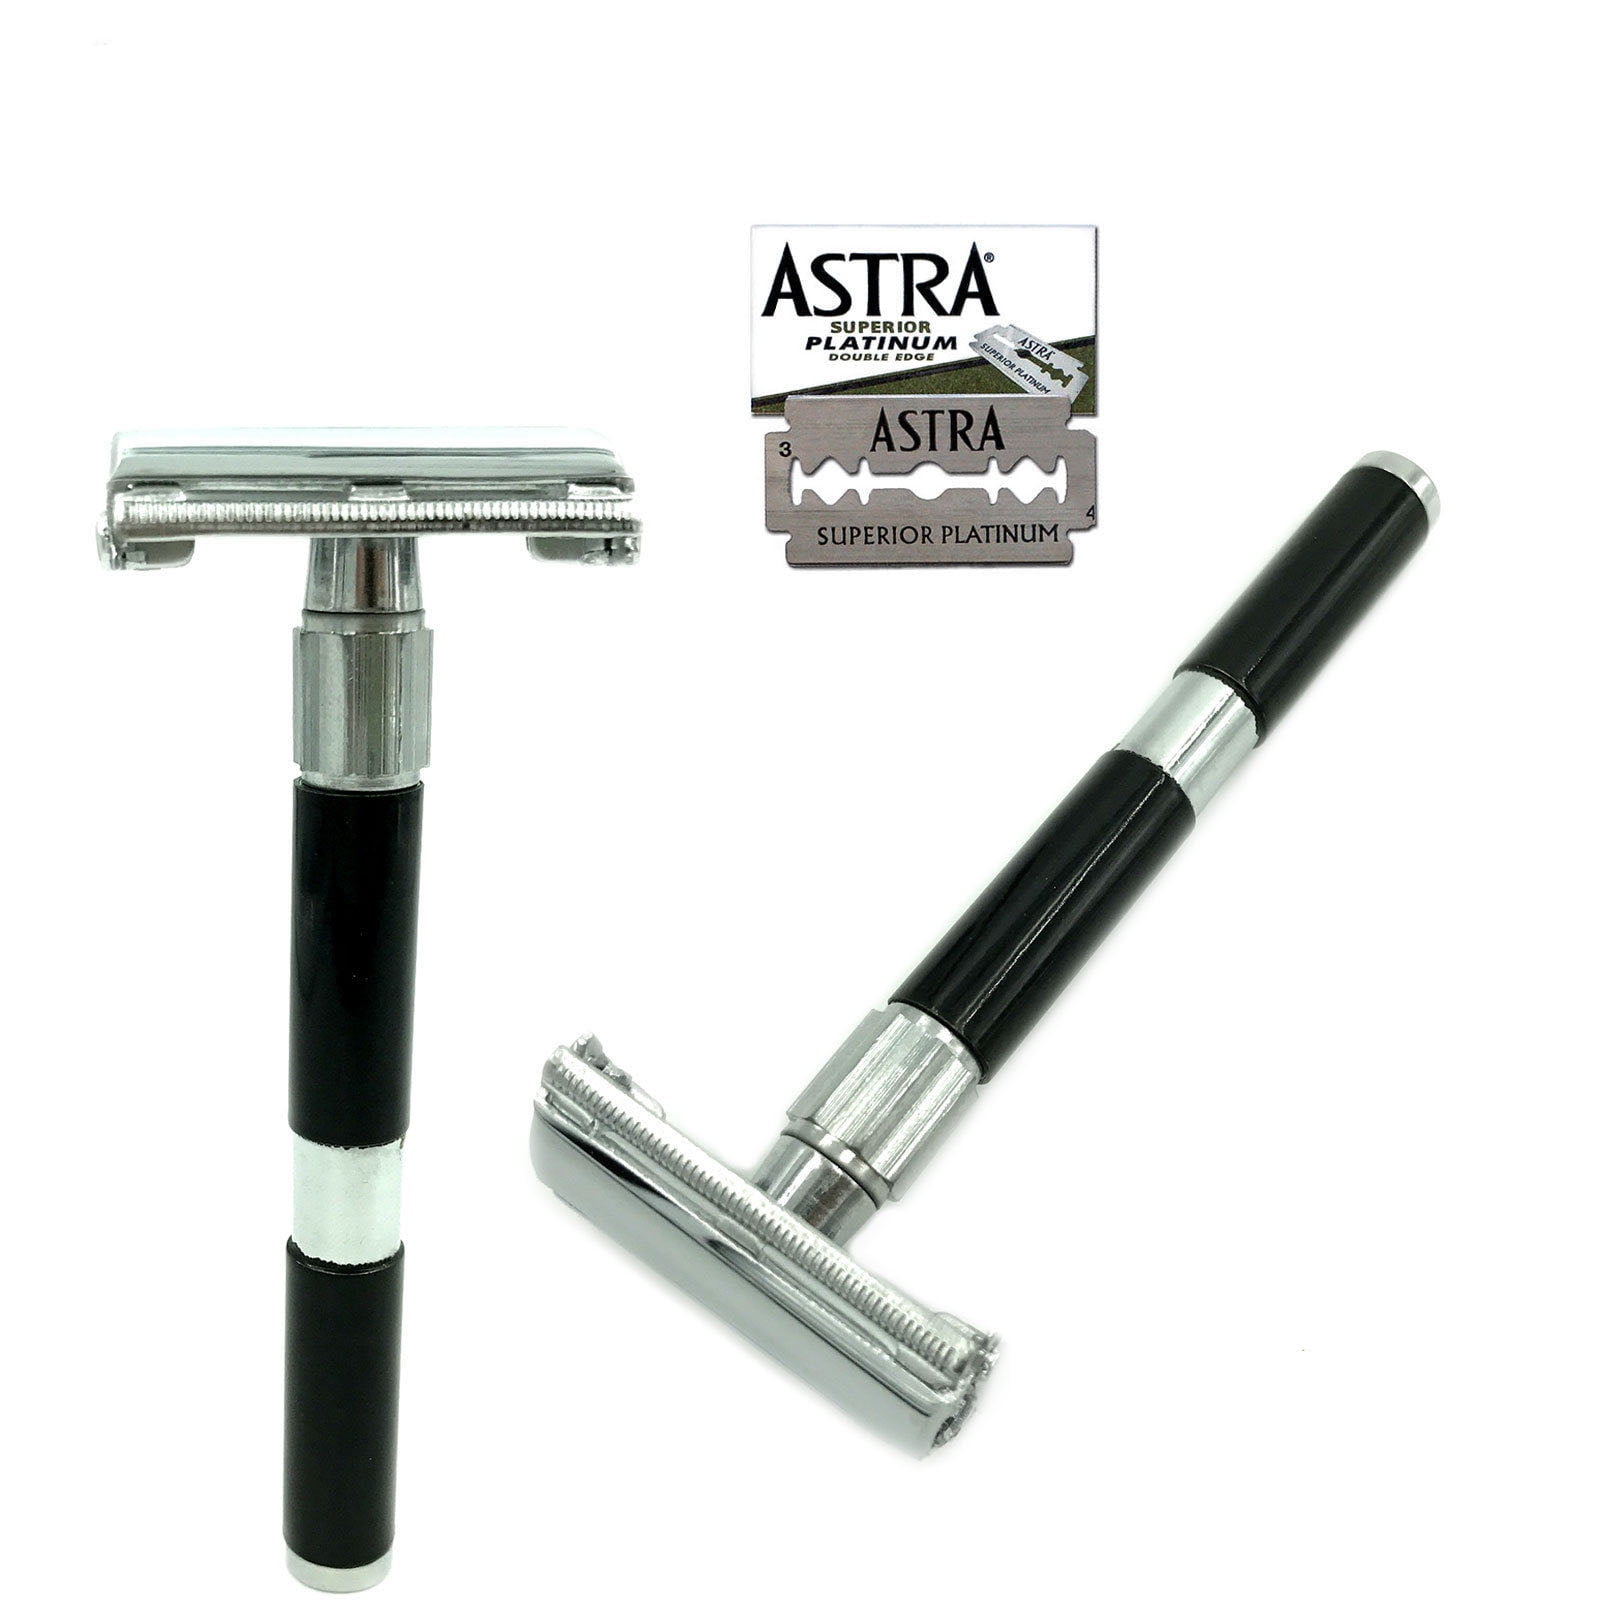 Long Handle Double Edge Safety Razor - Butterfly Open Razor with 10  Japanese Stainless Steel Double Edge Safety Razor Blades - Close, Clean  Shaving Razor for Men. Black